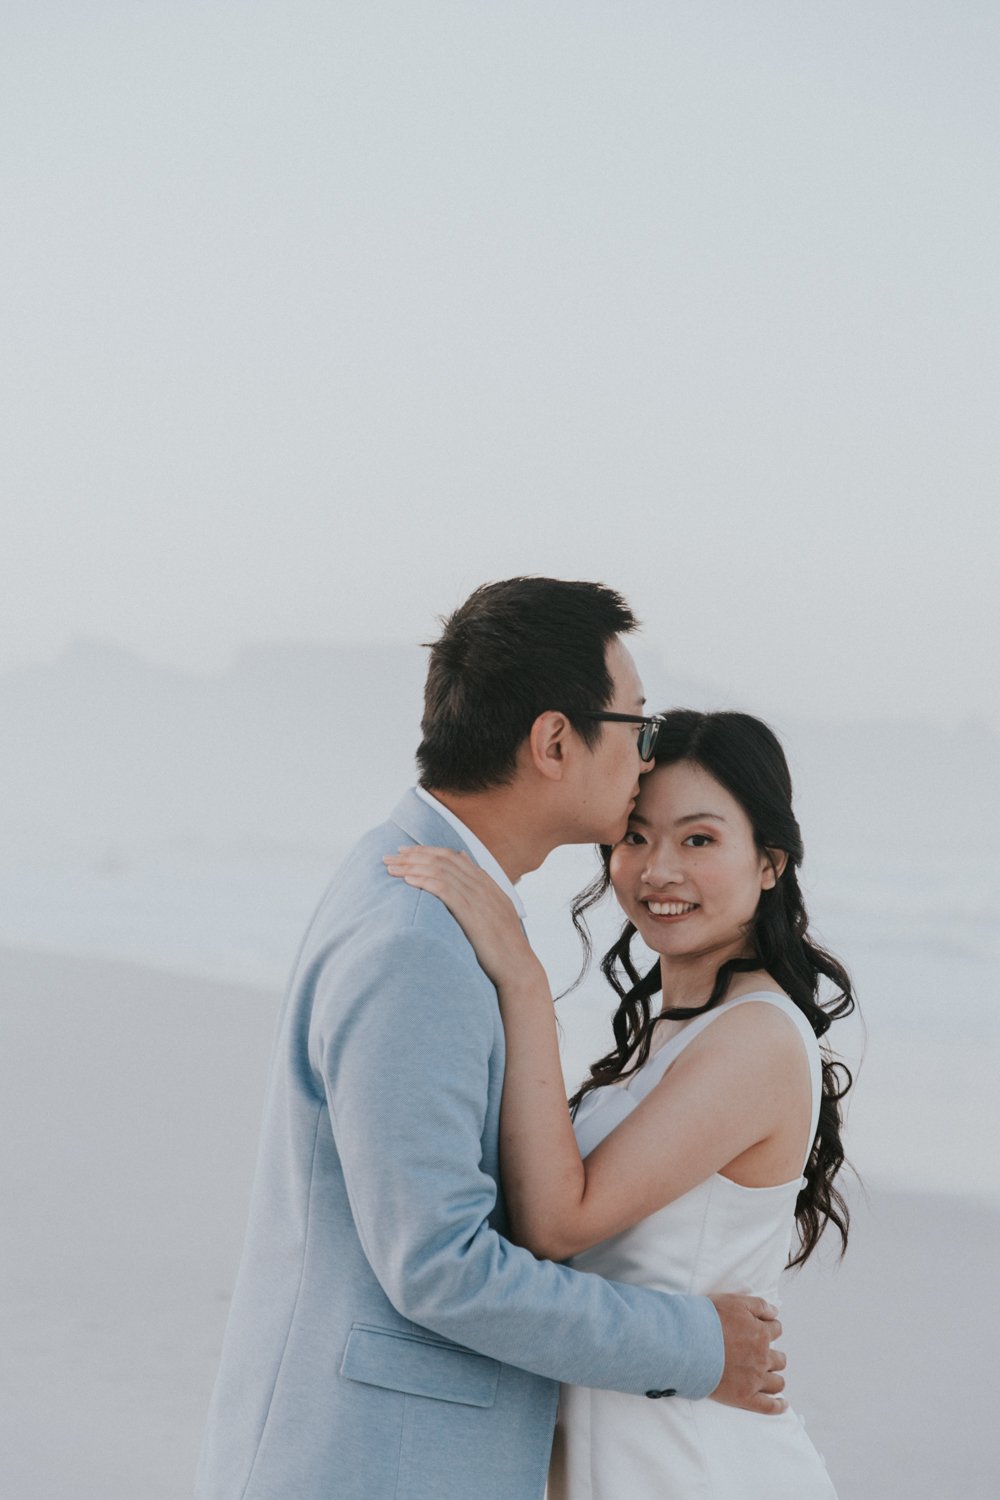 Wedding Shoot in Cape Town - Bianca Asher Photography-9.jpg